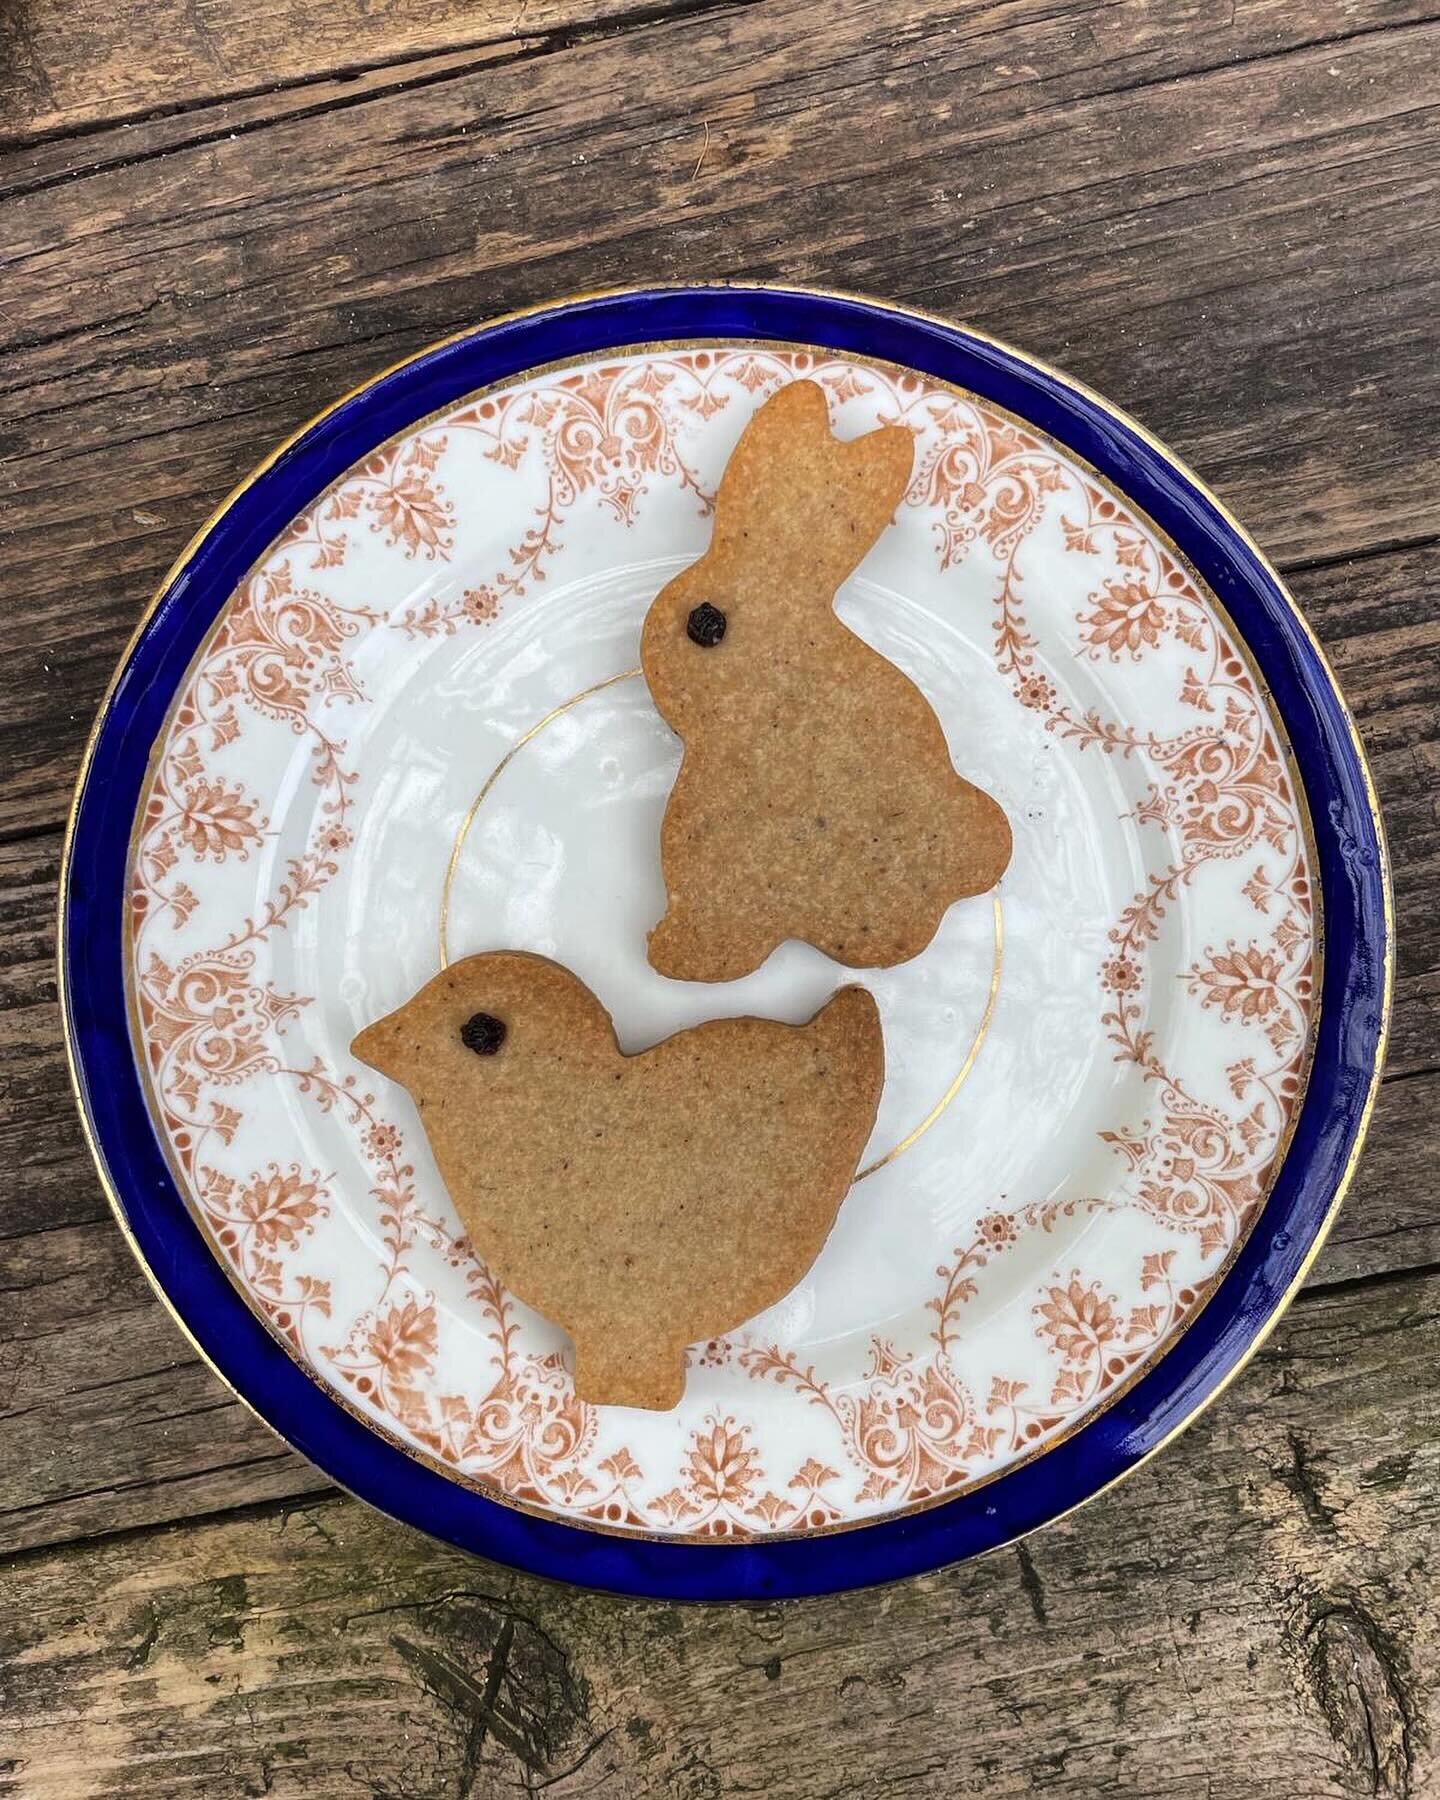 These cuties!

Spiced Easter biscuits 

#platformcafe #cakes #biscuits #coffee #easter24 #celebration #millyscakesandbuns

so